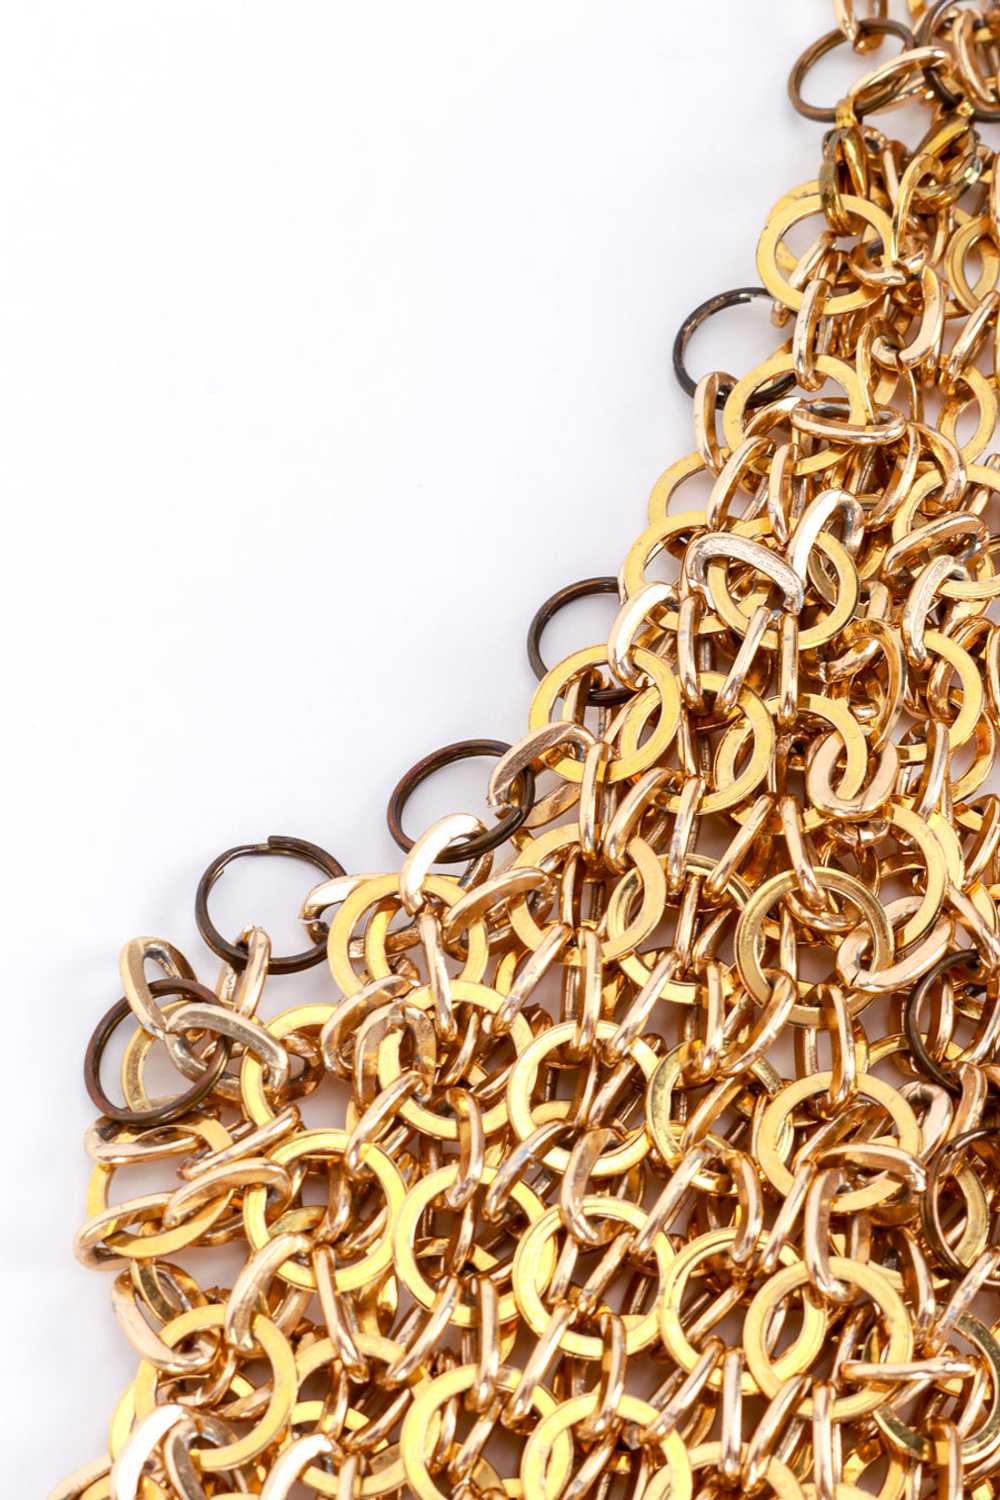 Ring Link Chain Dress - image 11